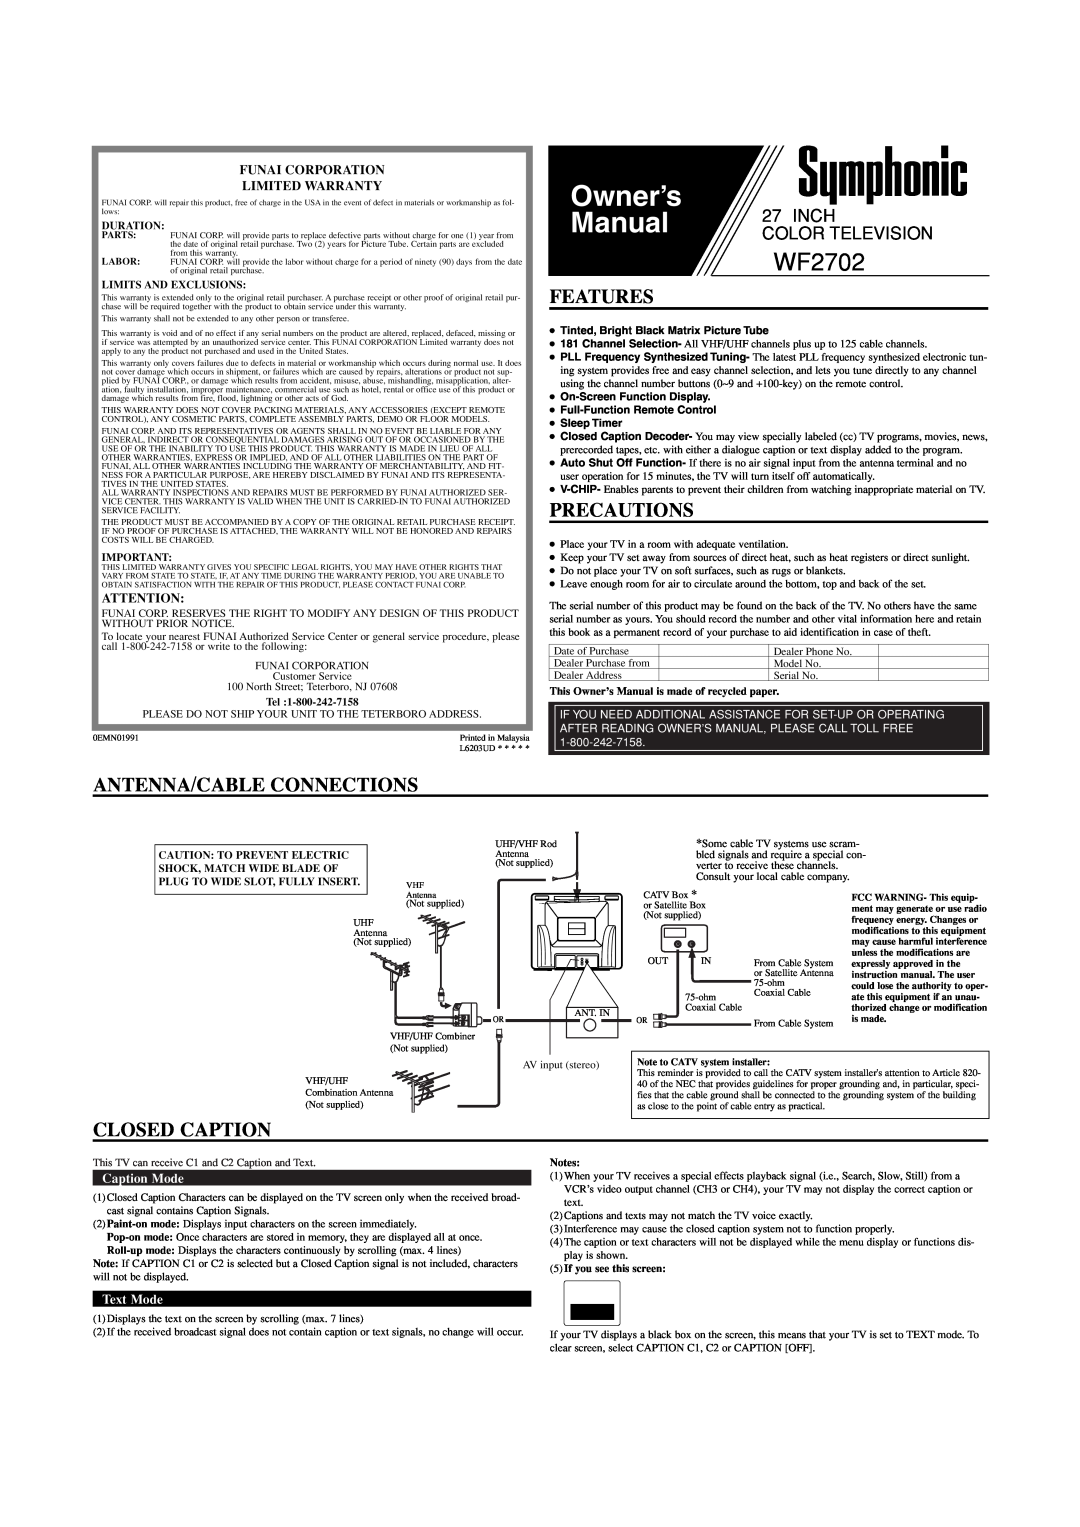 Symphonic WF2702 owner manual Features, Precautions, Antenna/Cable Connections, Closed Caption, Caption Mode, Text Mode 